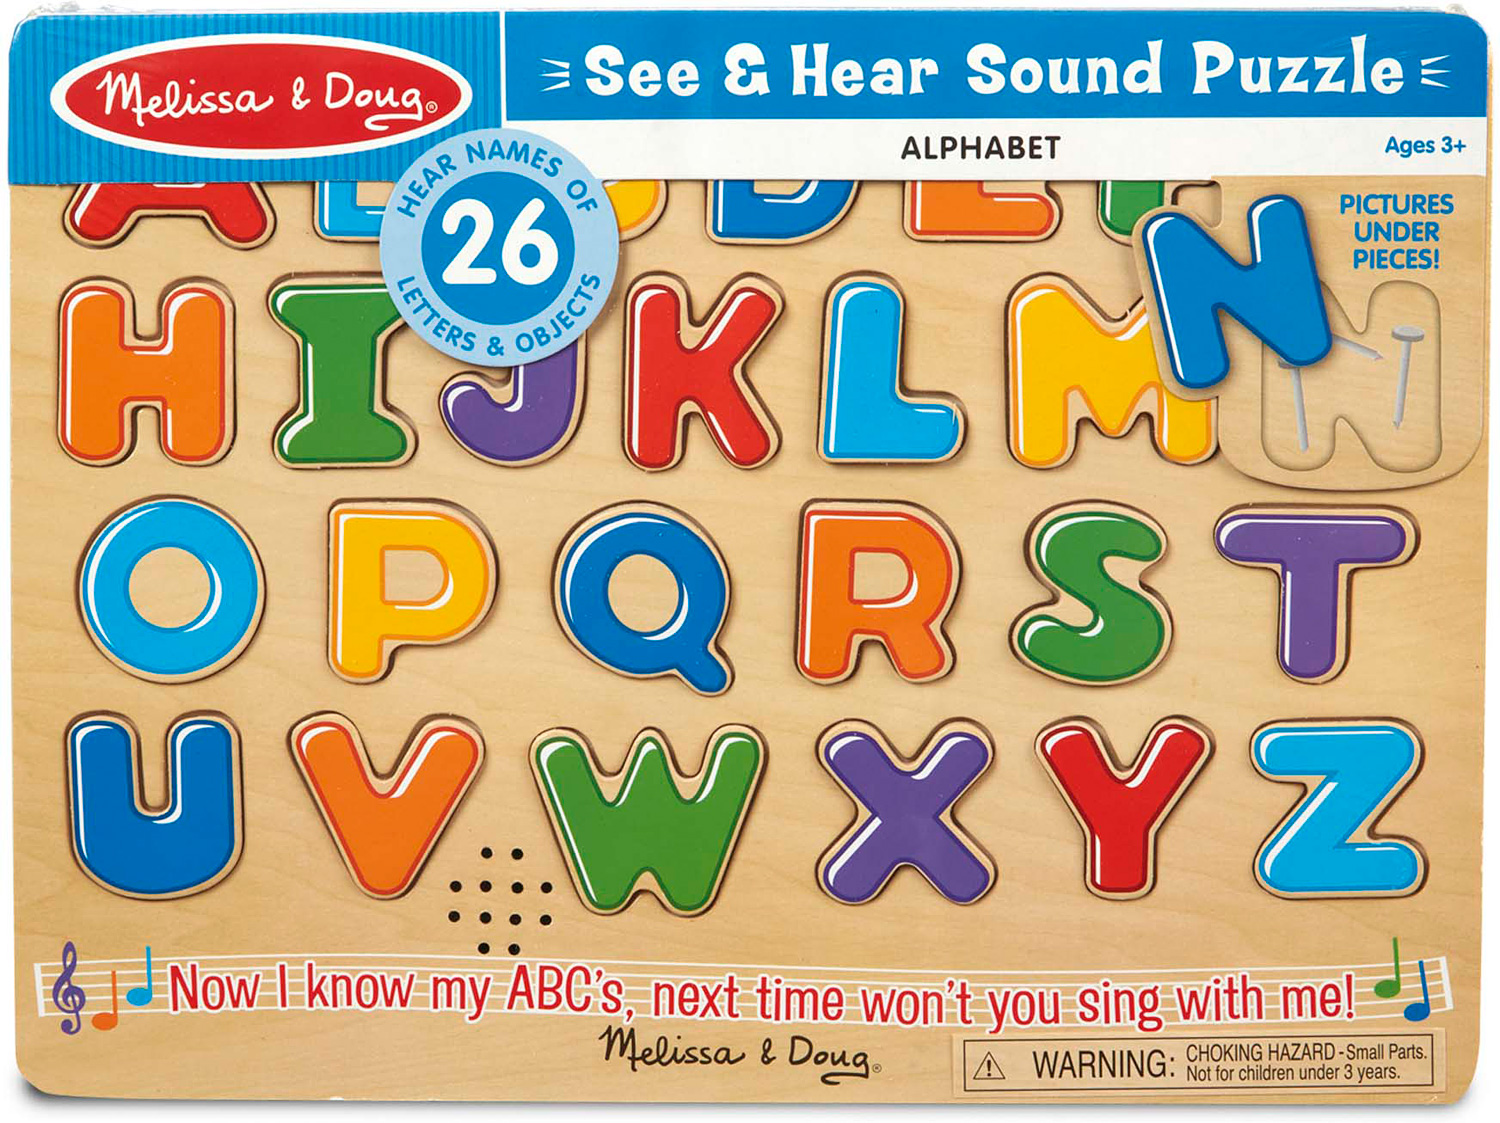 Alphabet Sound Puzzle - Givens Books and Little Dickens